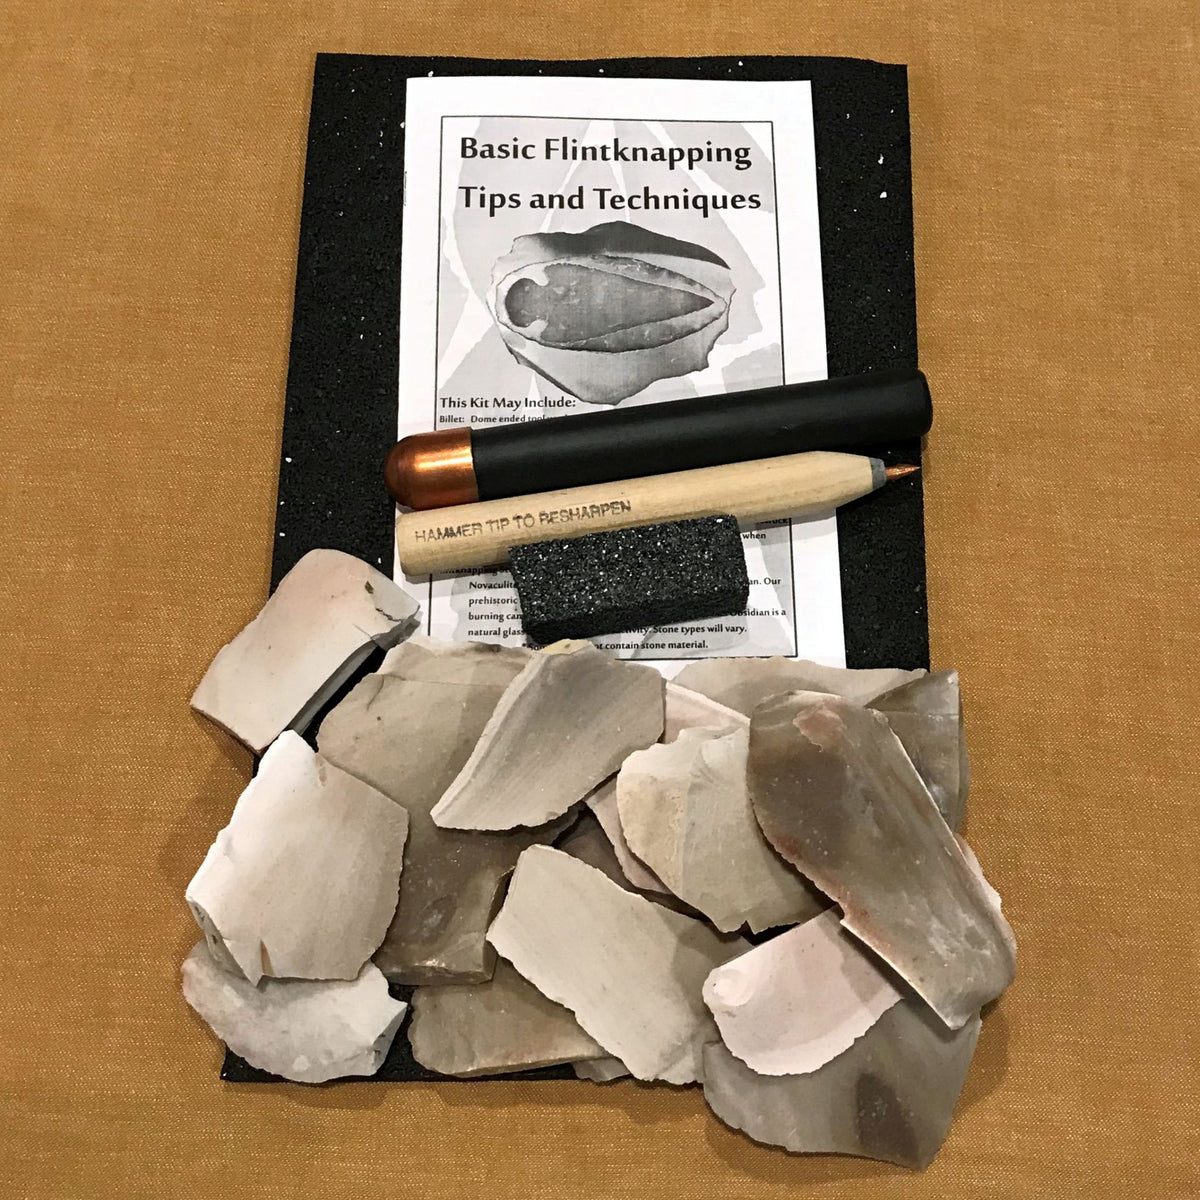 Primative tools and Flintknapping